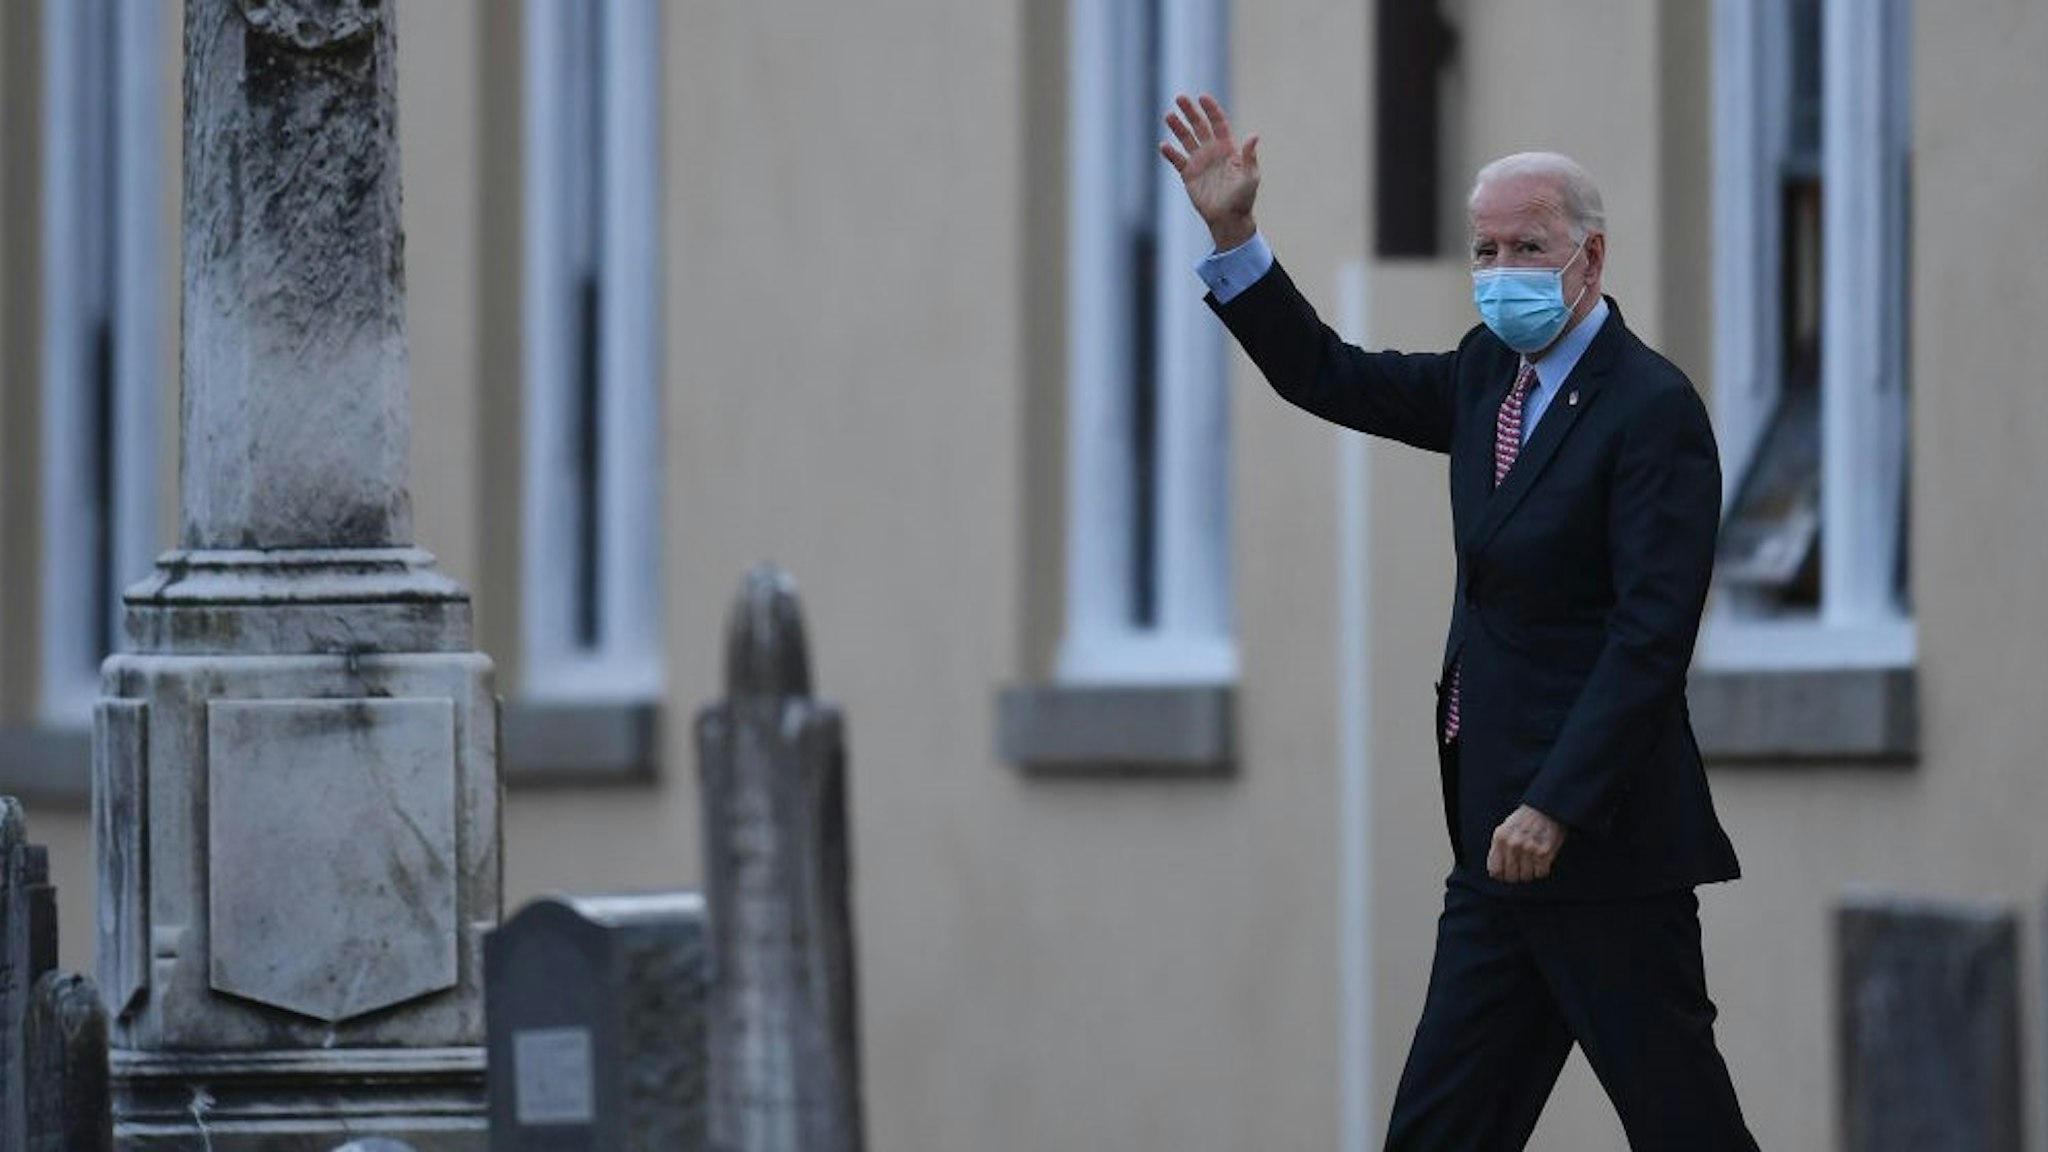 TOPSHOT - US President-elect Joe Biden waves as he leaves St. Joseph on the Brandywine Roman Catholic Church on January 16, 2021 in Wilmington, Delaware. - President-elect Joe Biden will sign executive orders on Inauguration Day next week to address the pandemic, the ailing US economy, climate change and racial injustice in America, a senior aide said Saturday. (Photo by Angela Weiss / AFP) (Photo by